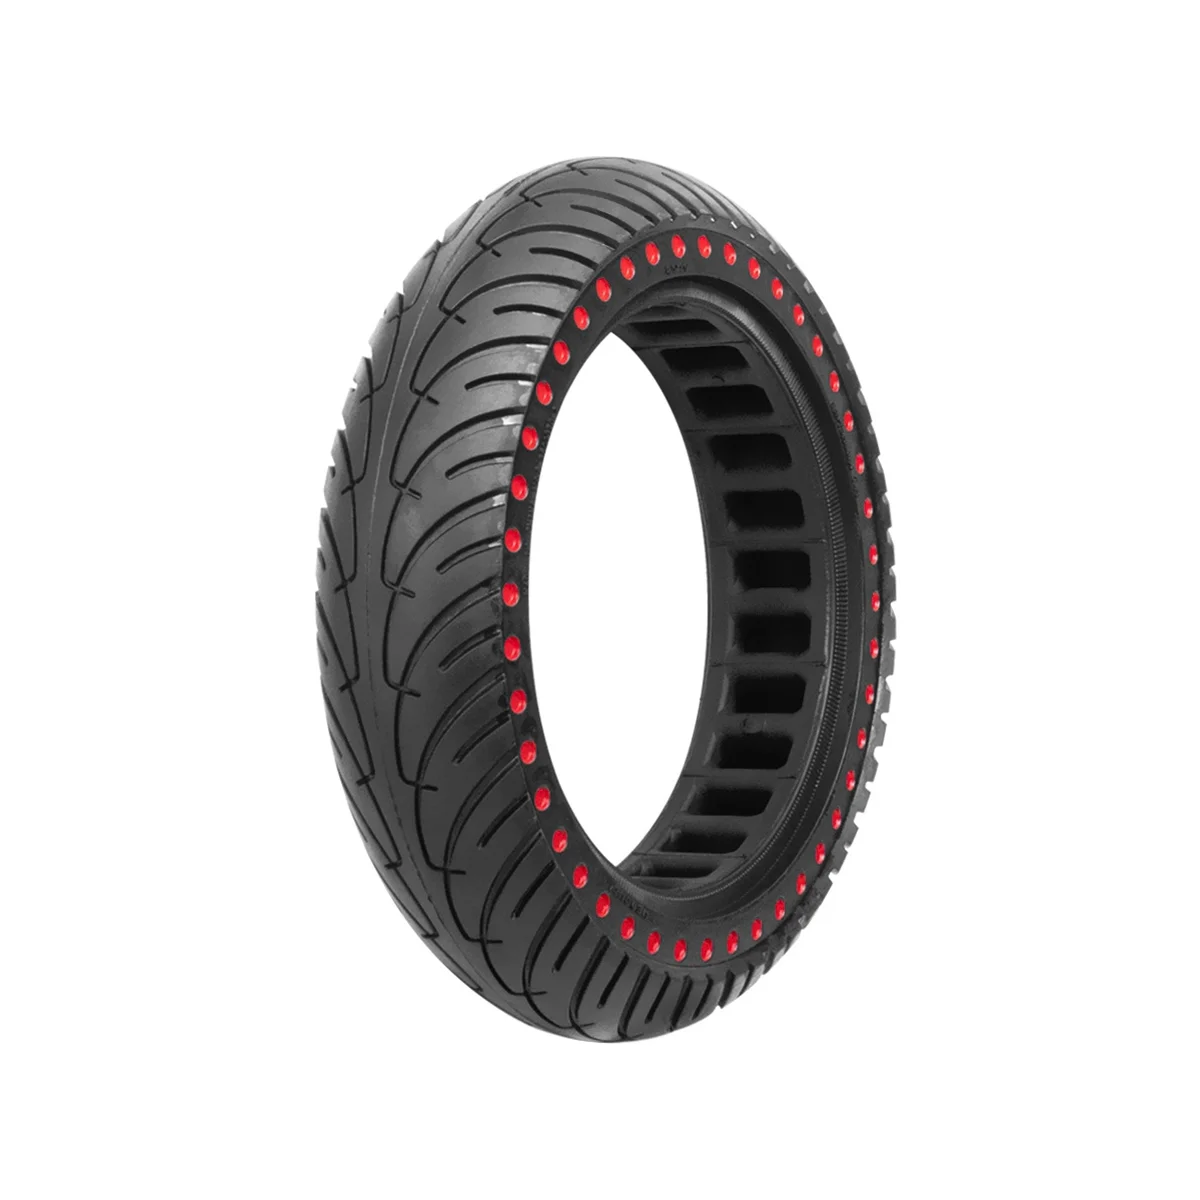 

8.5Inch Solid Tire for Xiaomi M365 1S Pro Electric Scooter Anti-Explosion Tire Absorber Damping Honeycomb Tyre, Red